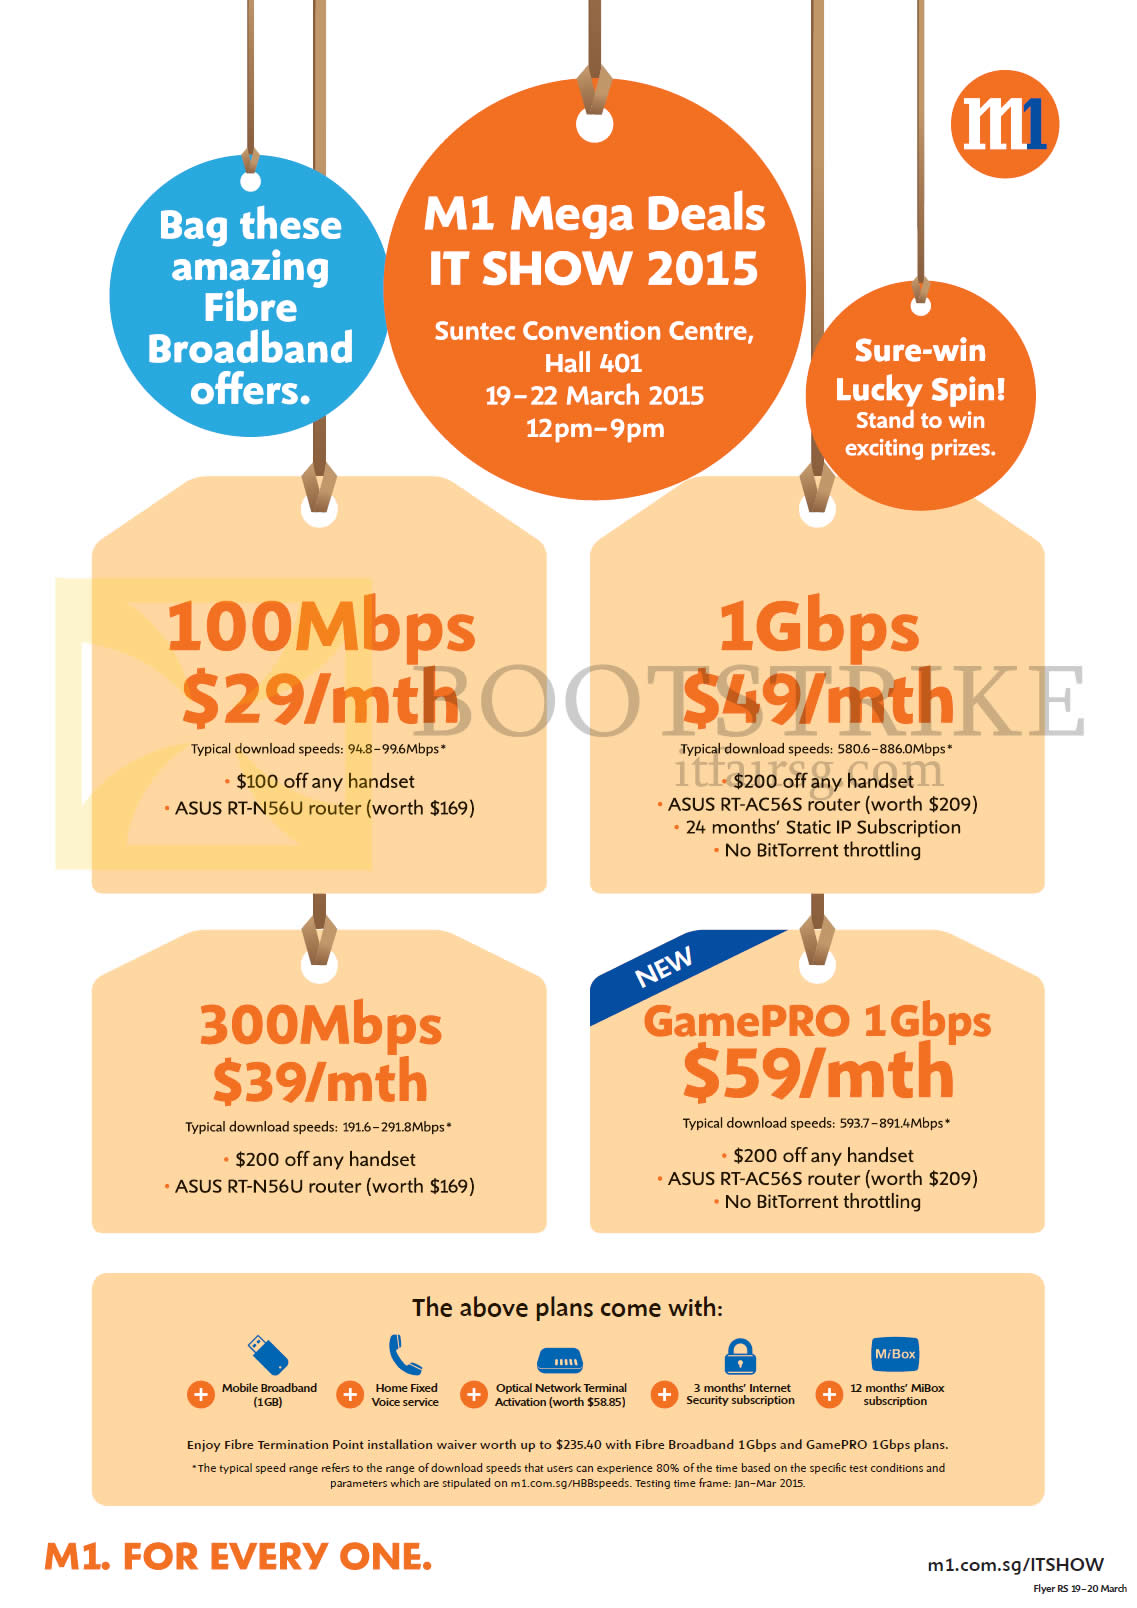 Featured image for M1 IT SHOW 2015 Smartphones, Tablets & Home/Mobile Broadband Offers 19 - 22 Mar 2015